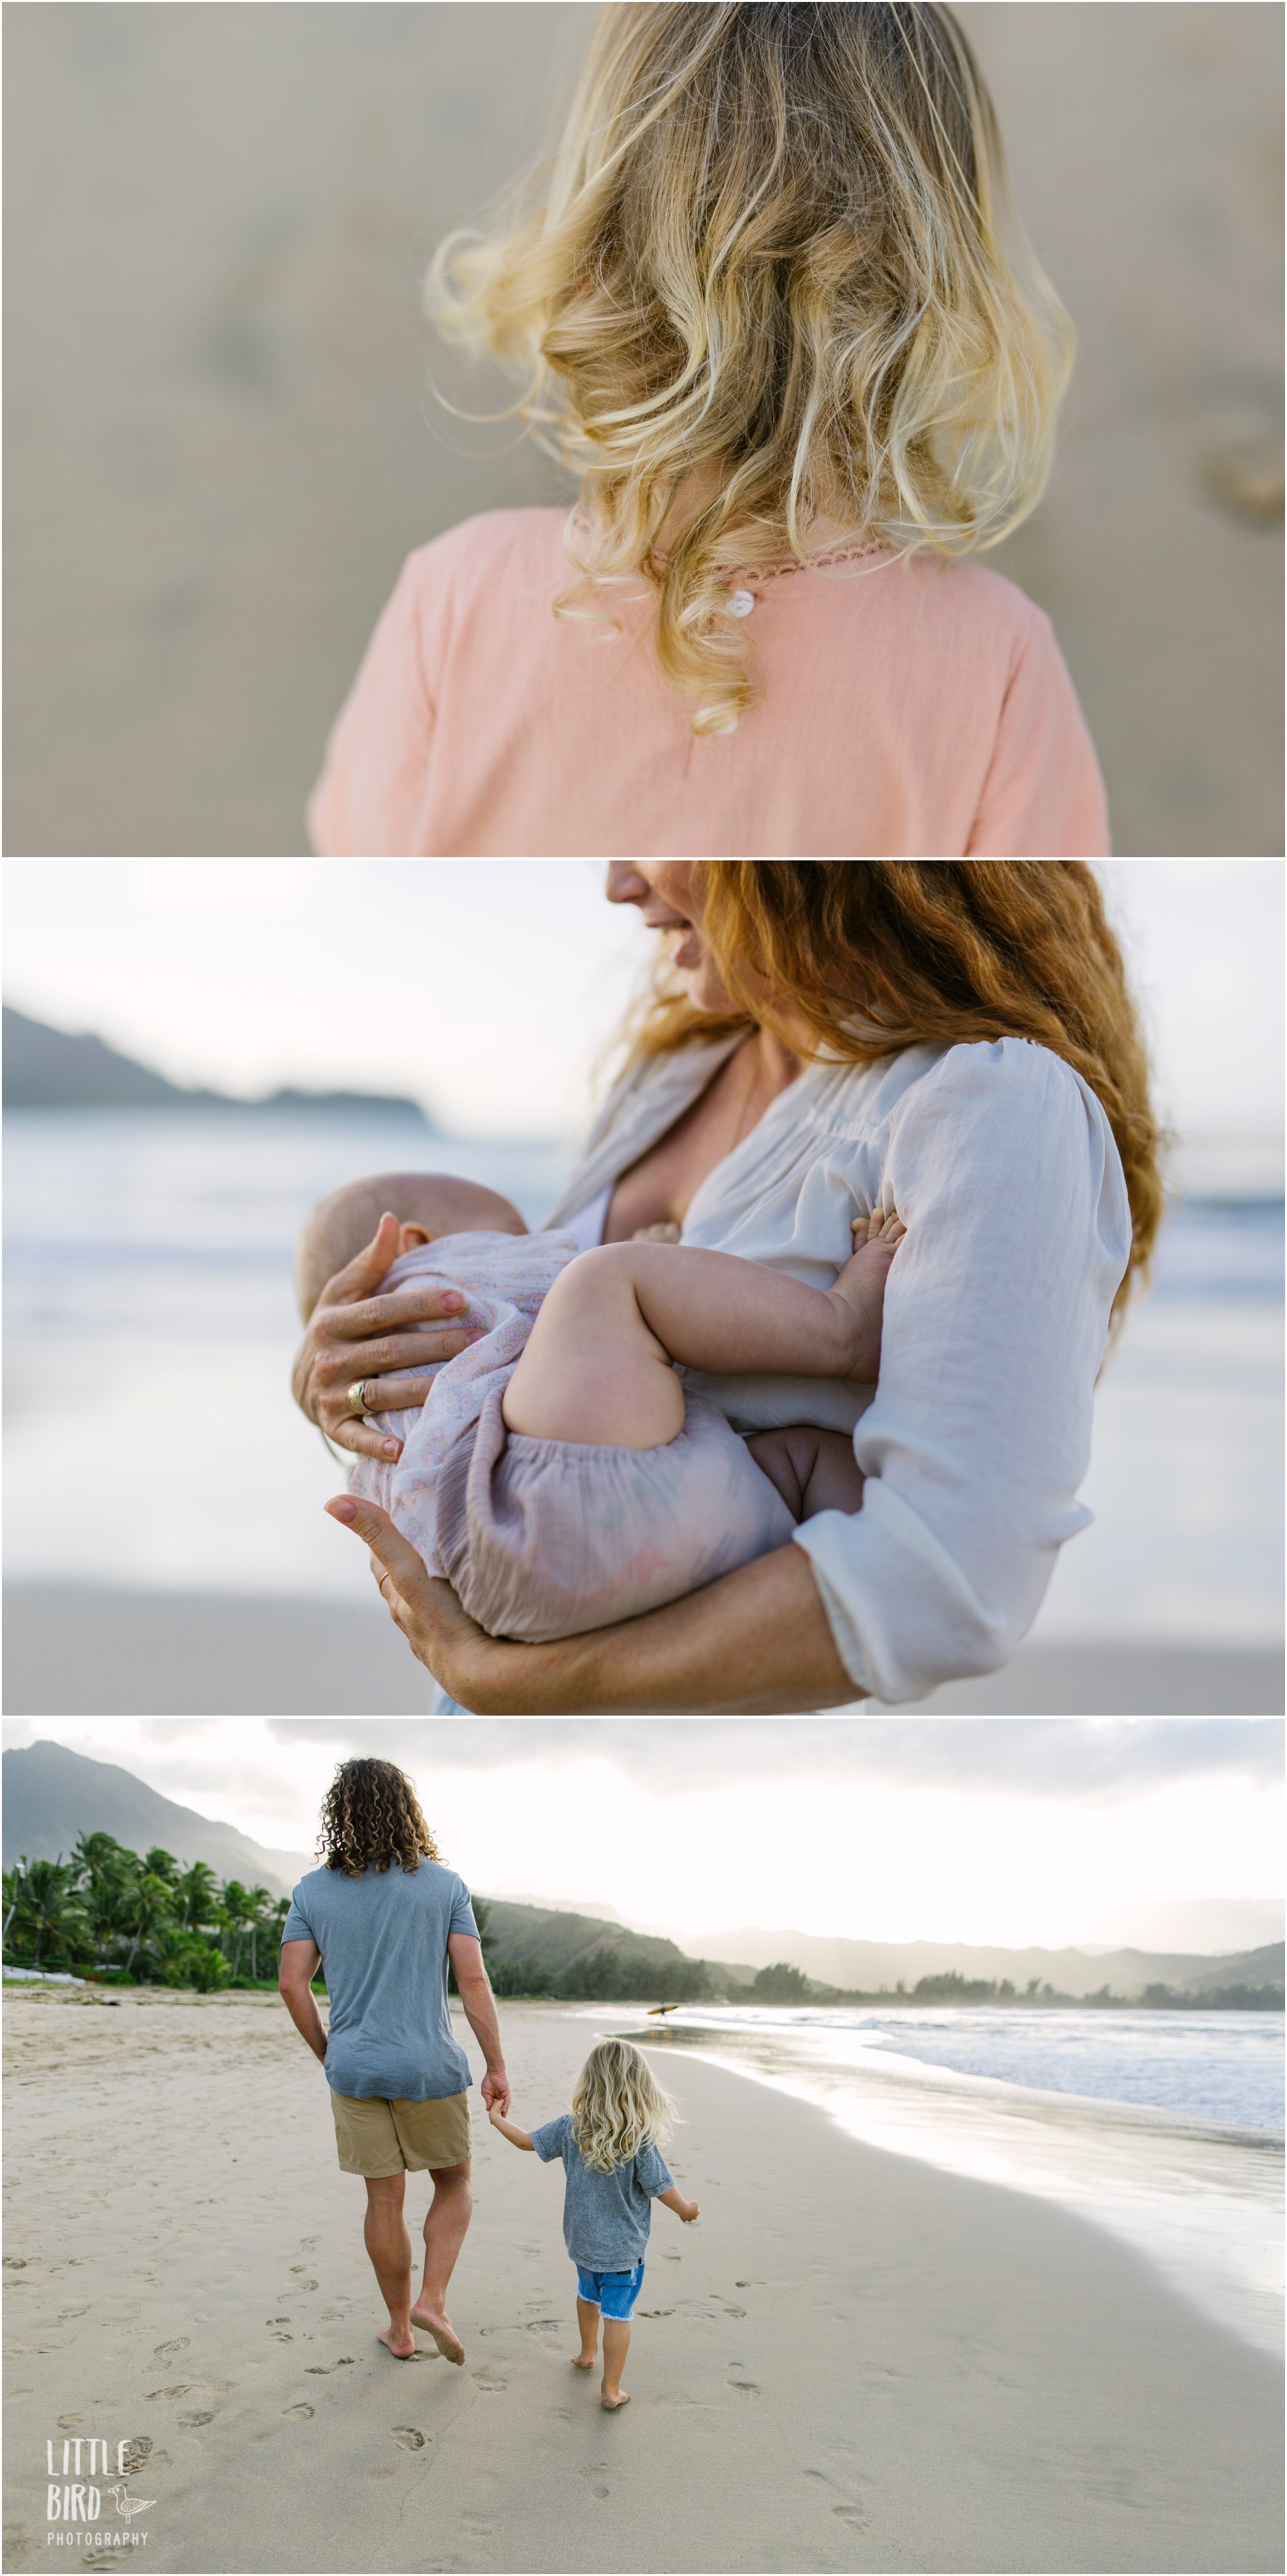 Hawaii family lifestyle photoshoot at Hanalei Bay by Little Bird Photography